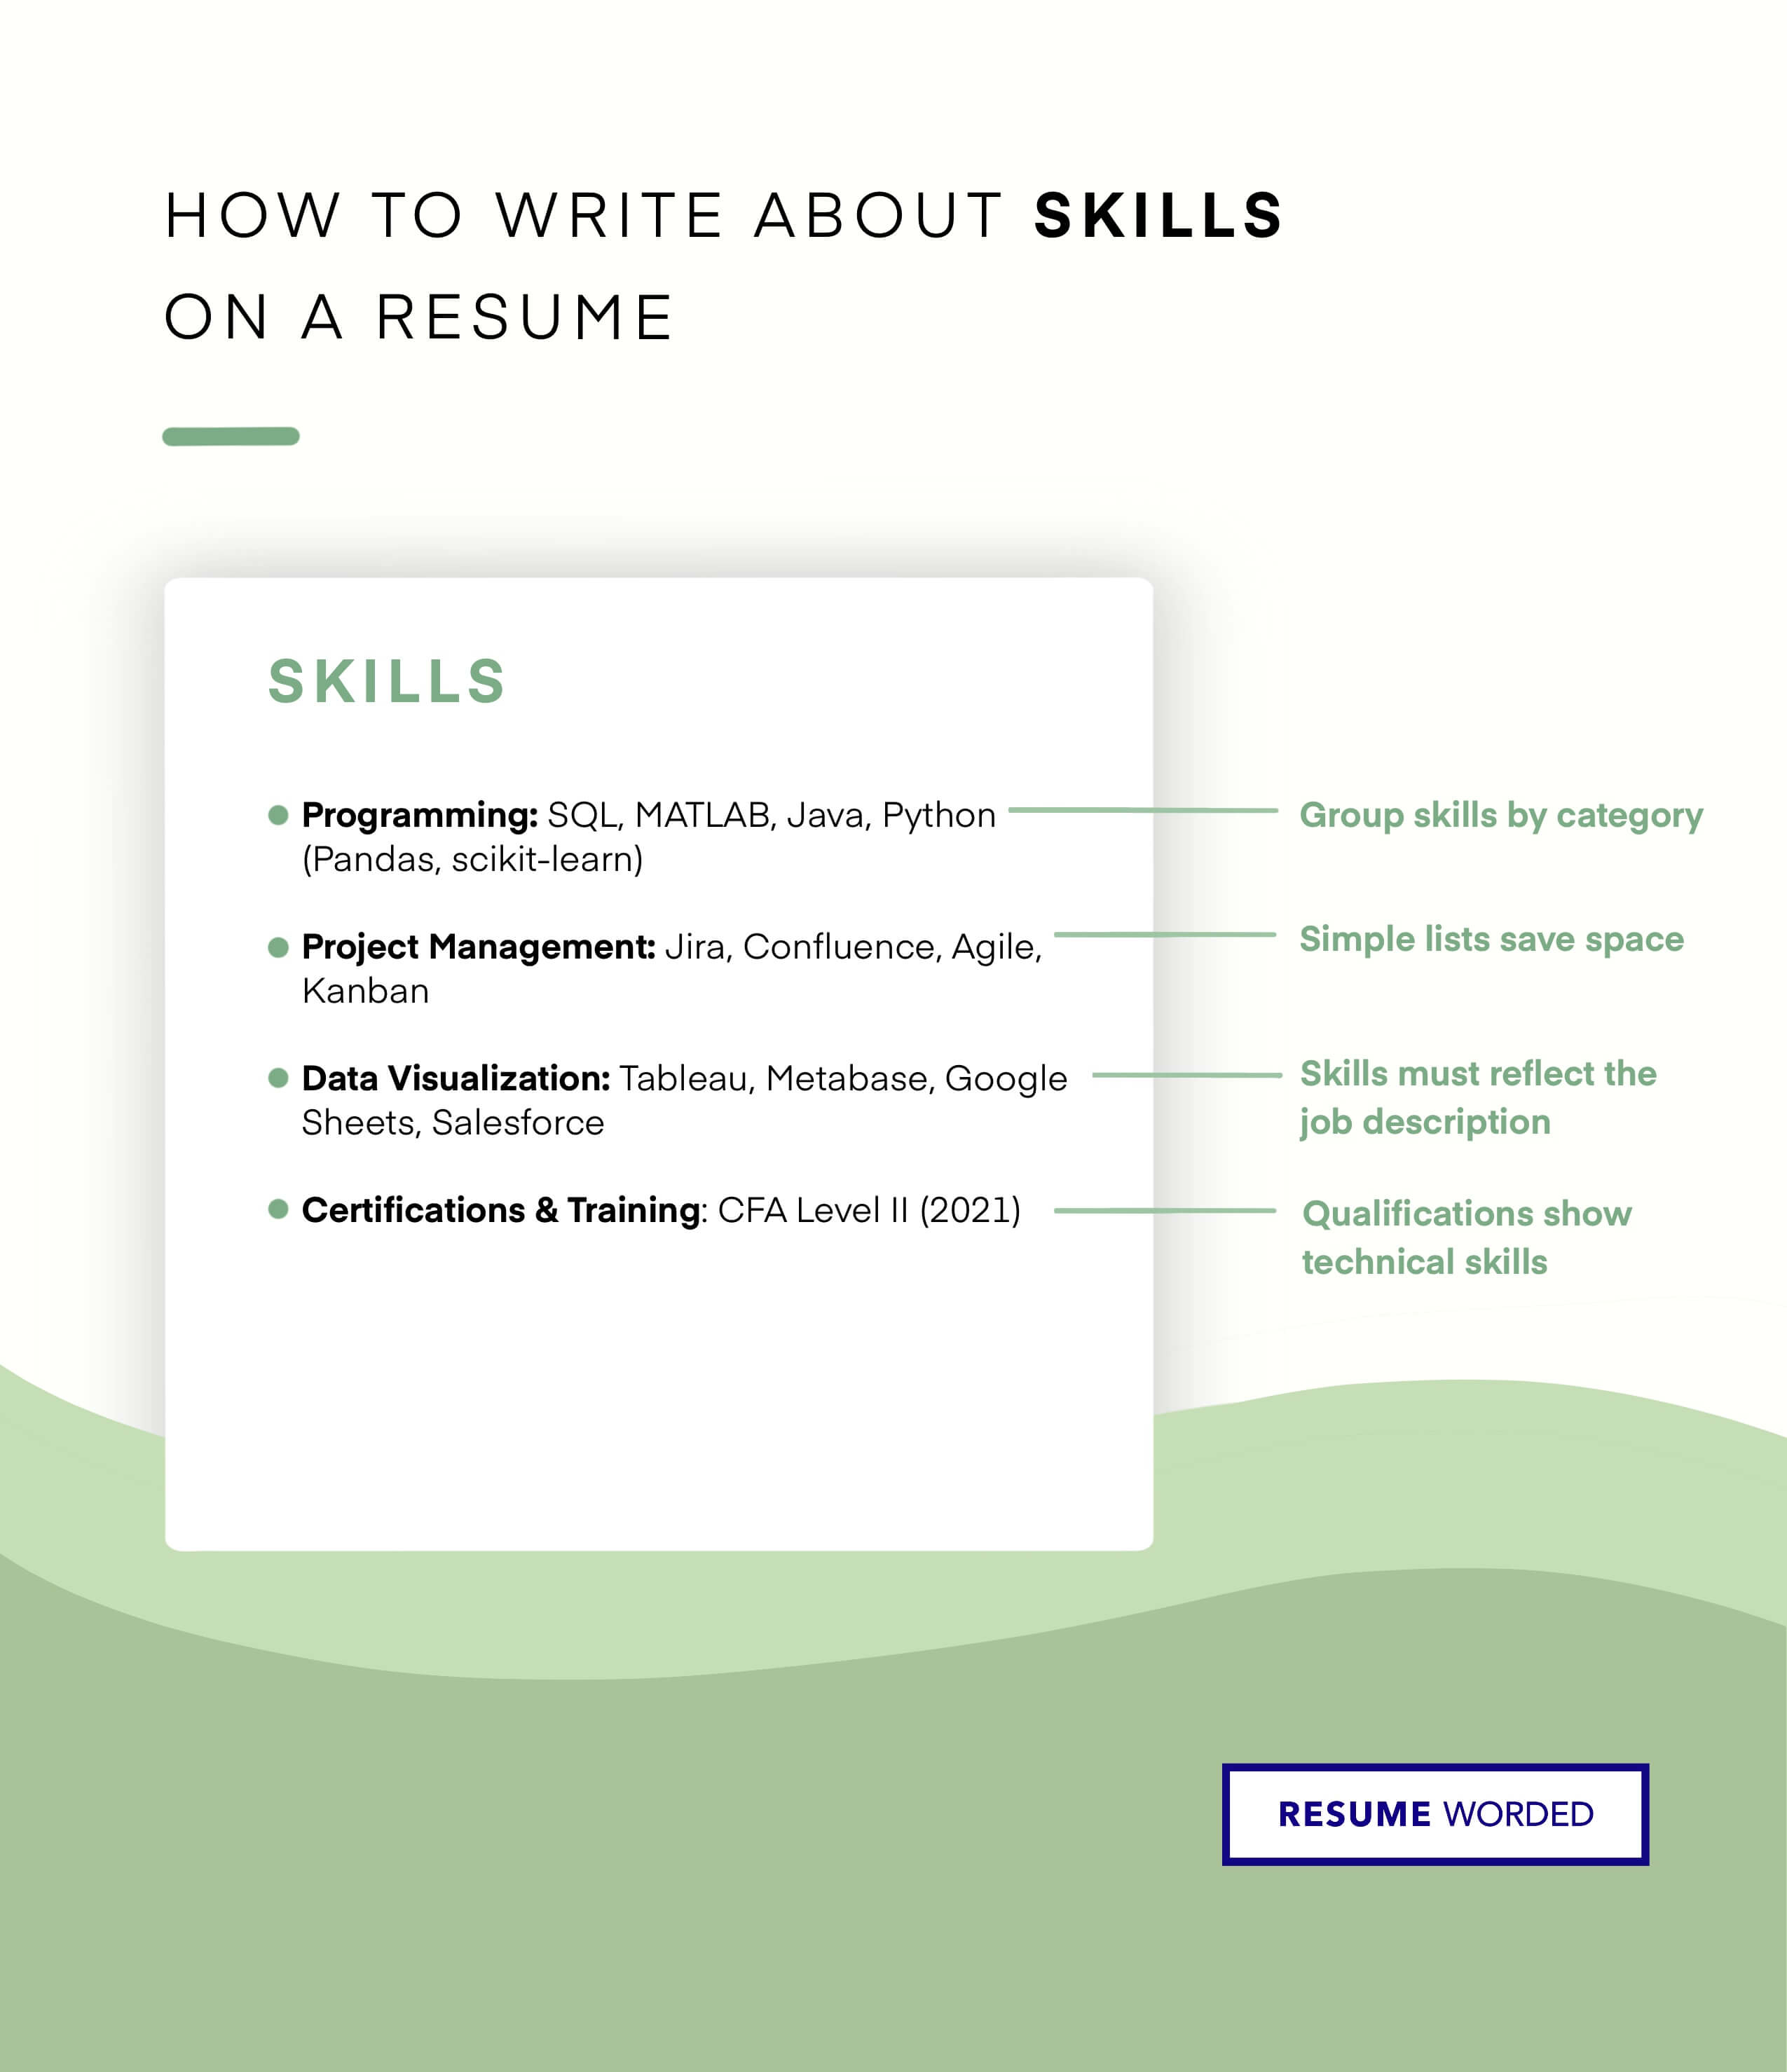 Include a technical skills section